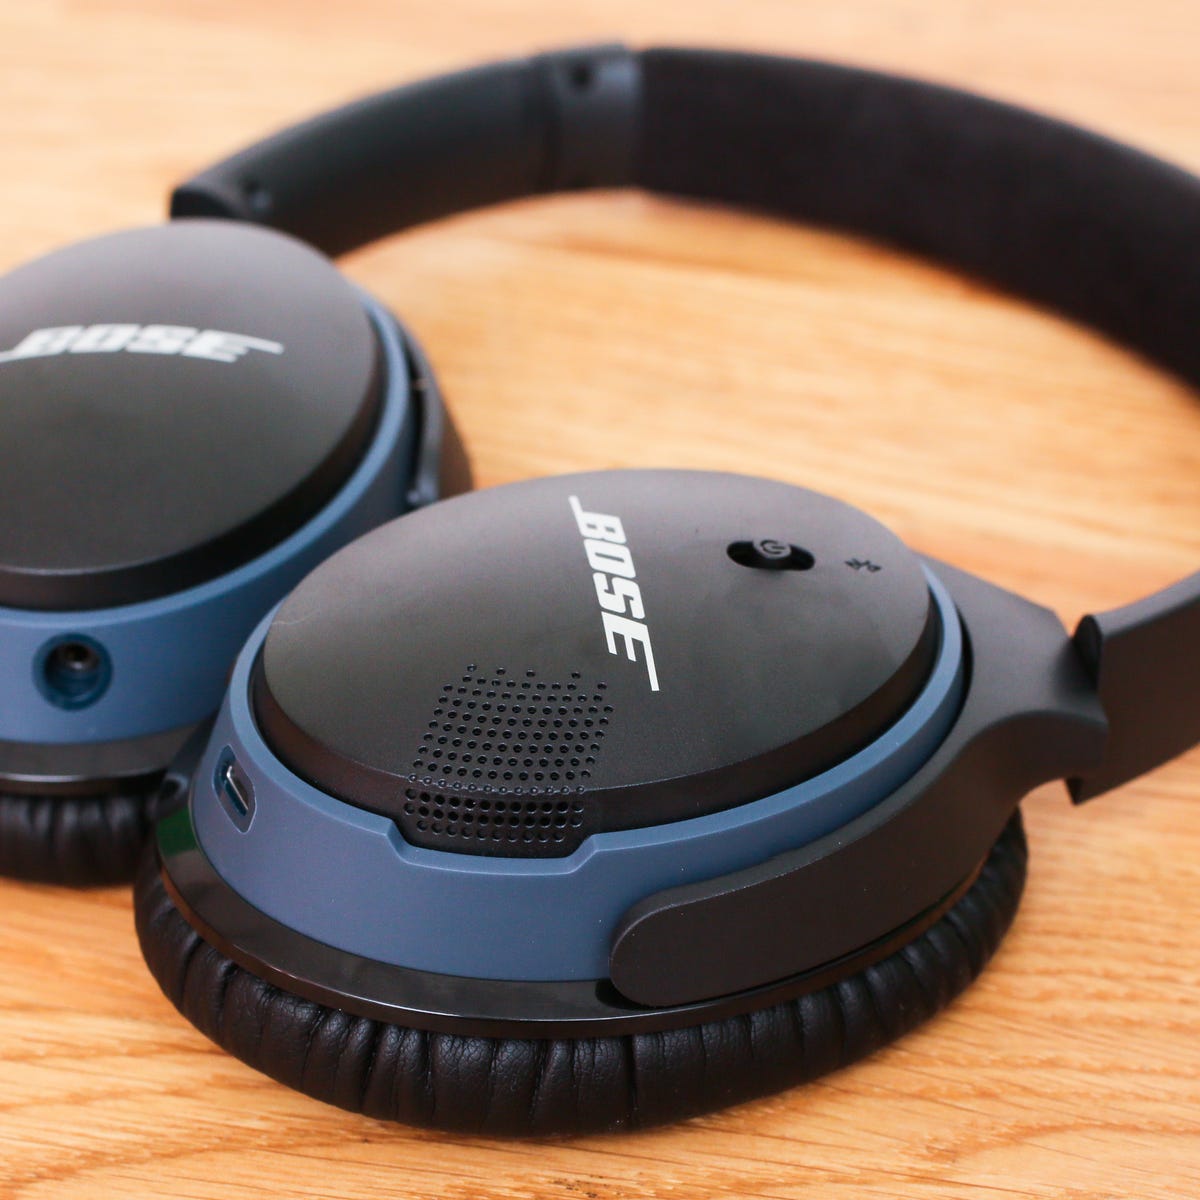 snorkel Generel fængelsflugt Bose SoundLink Around-Ear Wireless Headphones II review: A very comfortable Bluetooth  headphone with strong performance - CNET